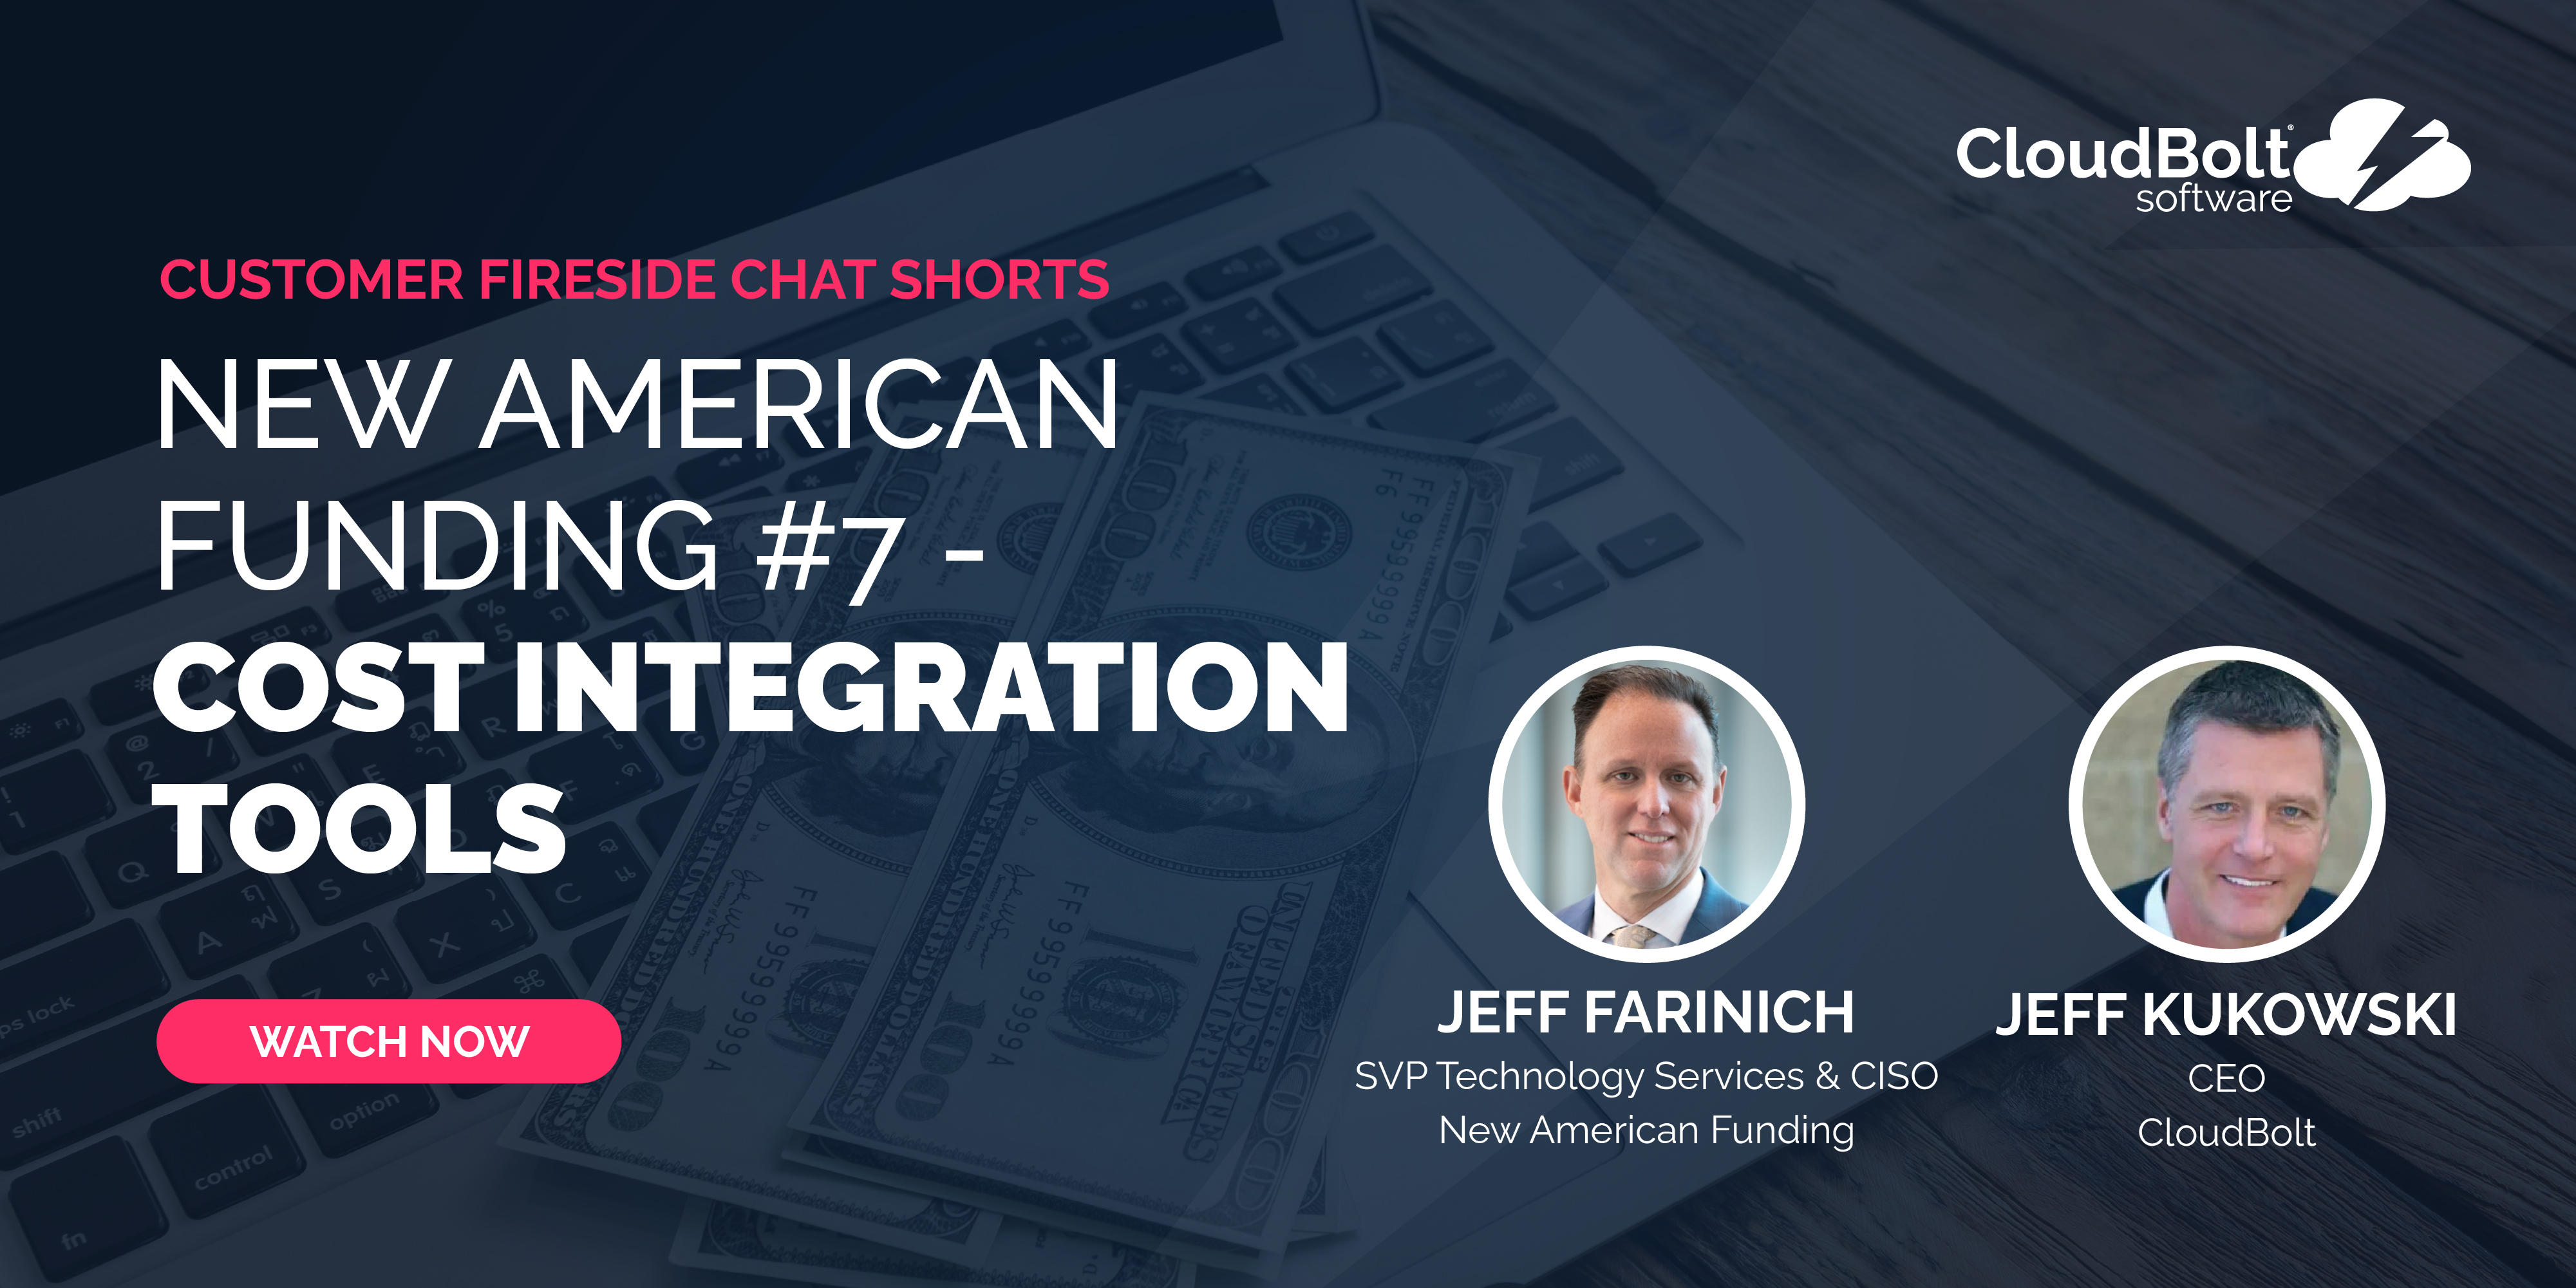 New American Funding #7—Cost Integration Tools